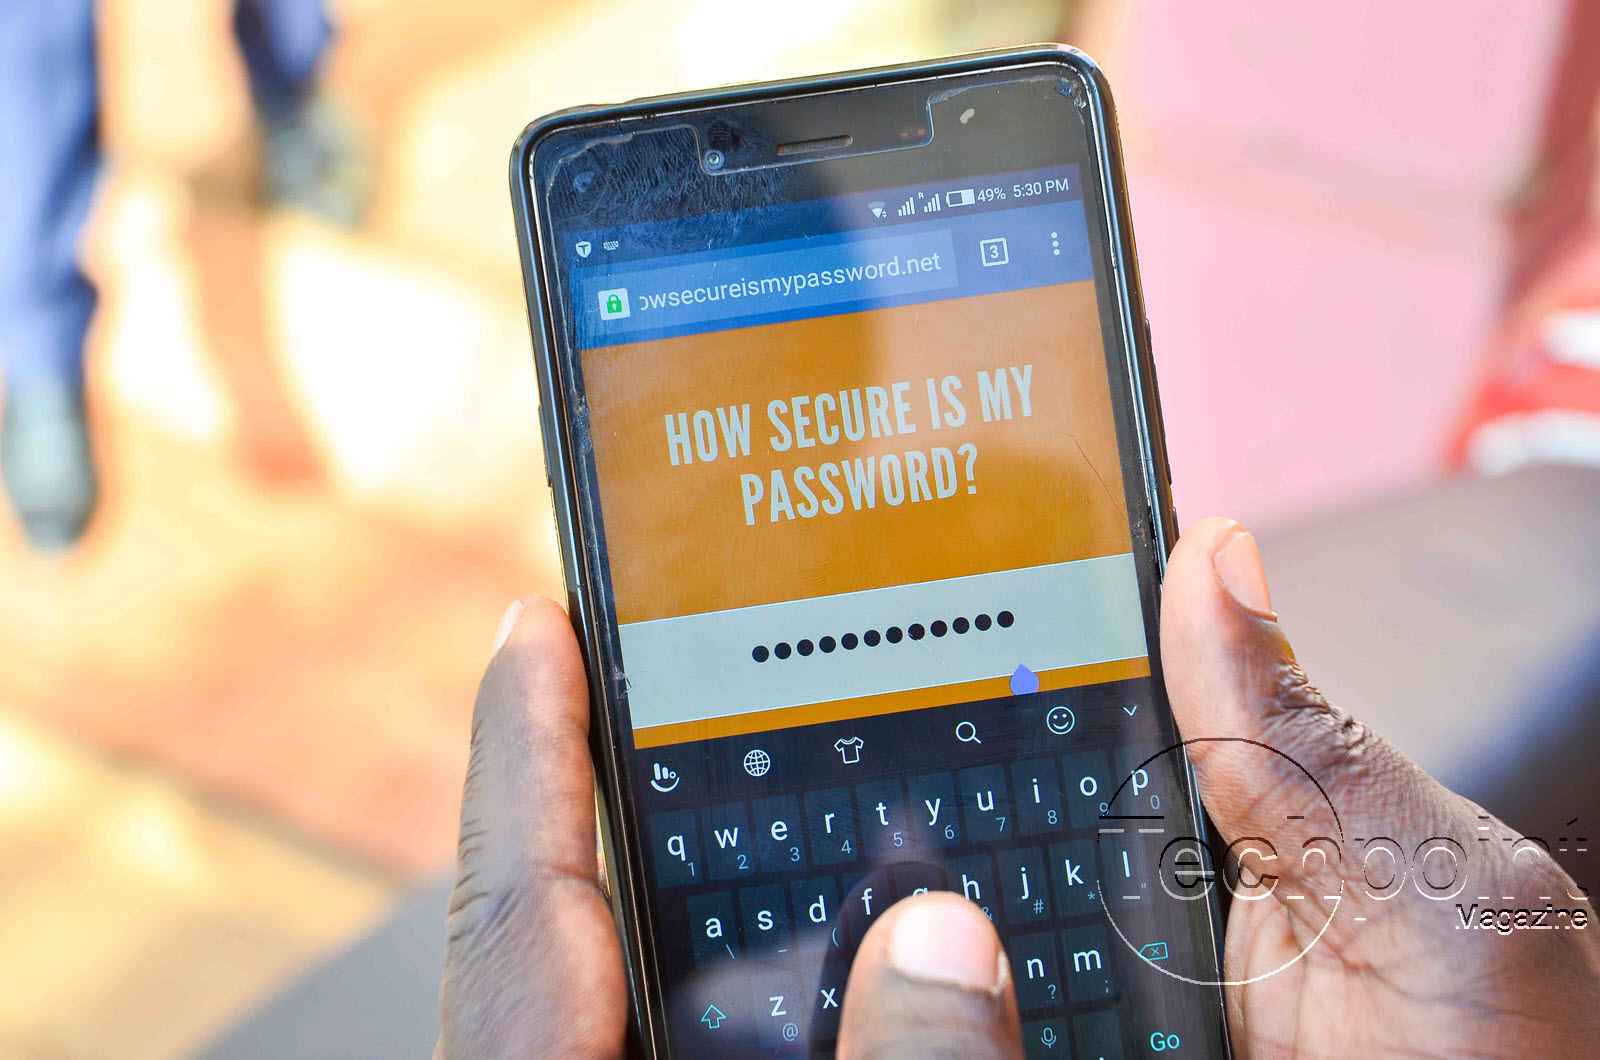 how secure is your password